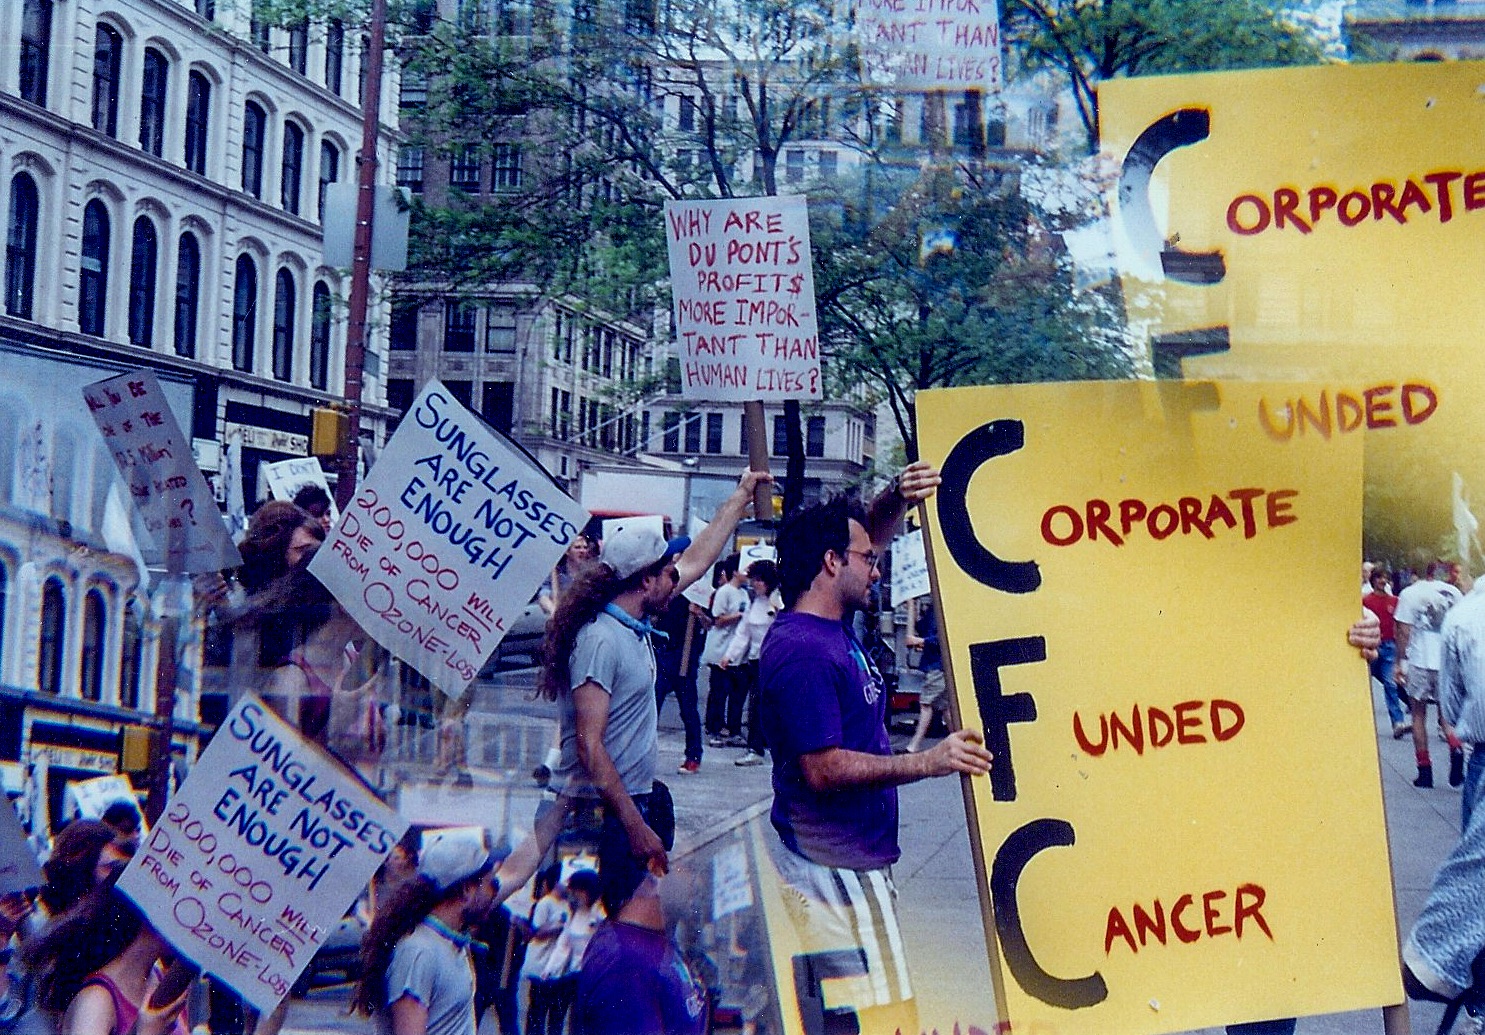 A collage-style photo from a past Time's Up protest in Lower Manhattan against ozone depletion.